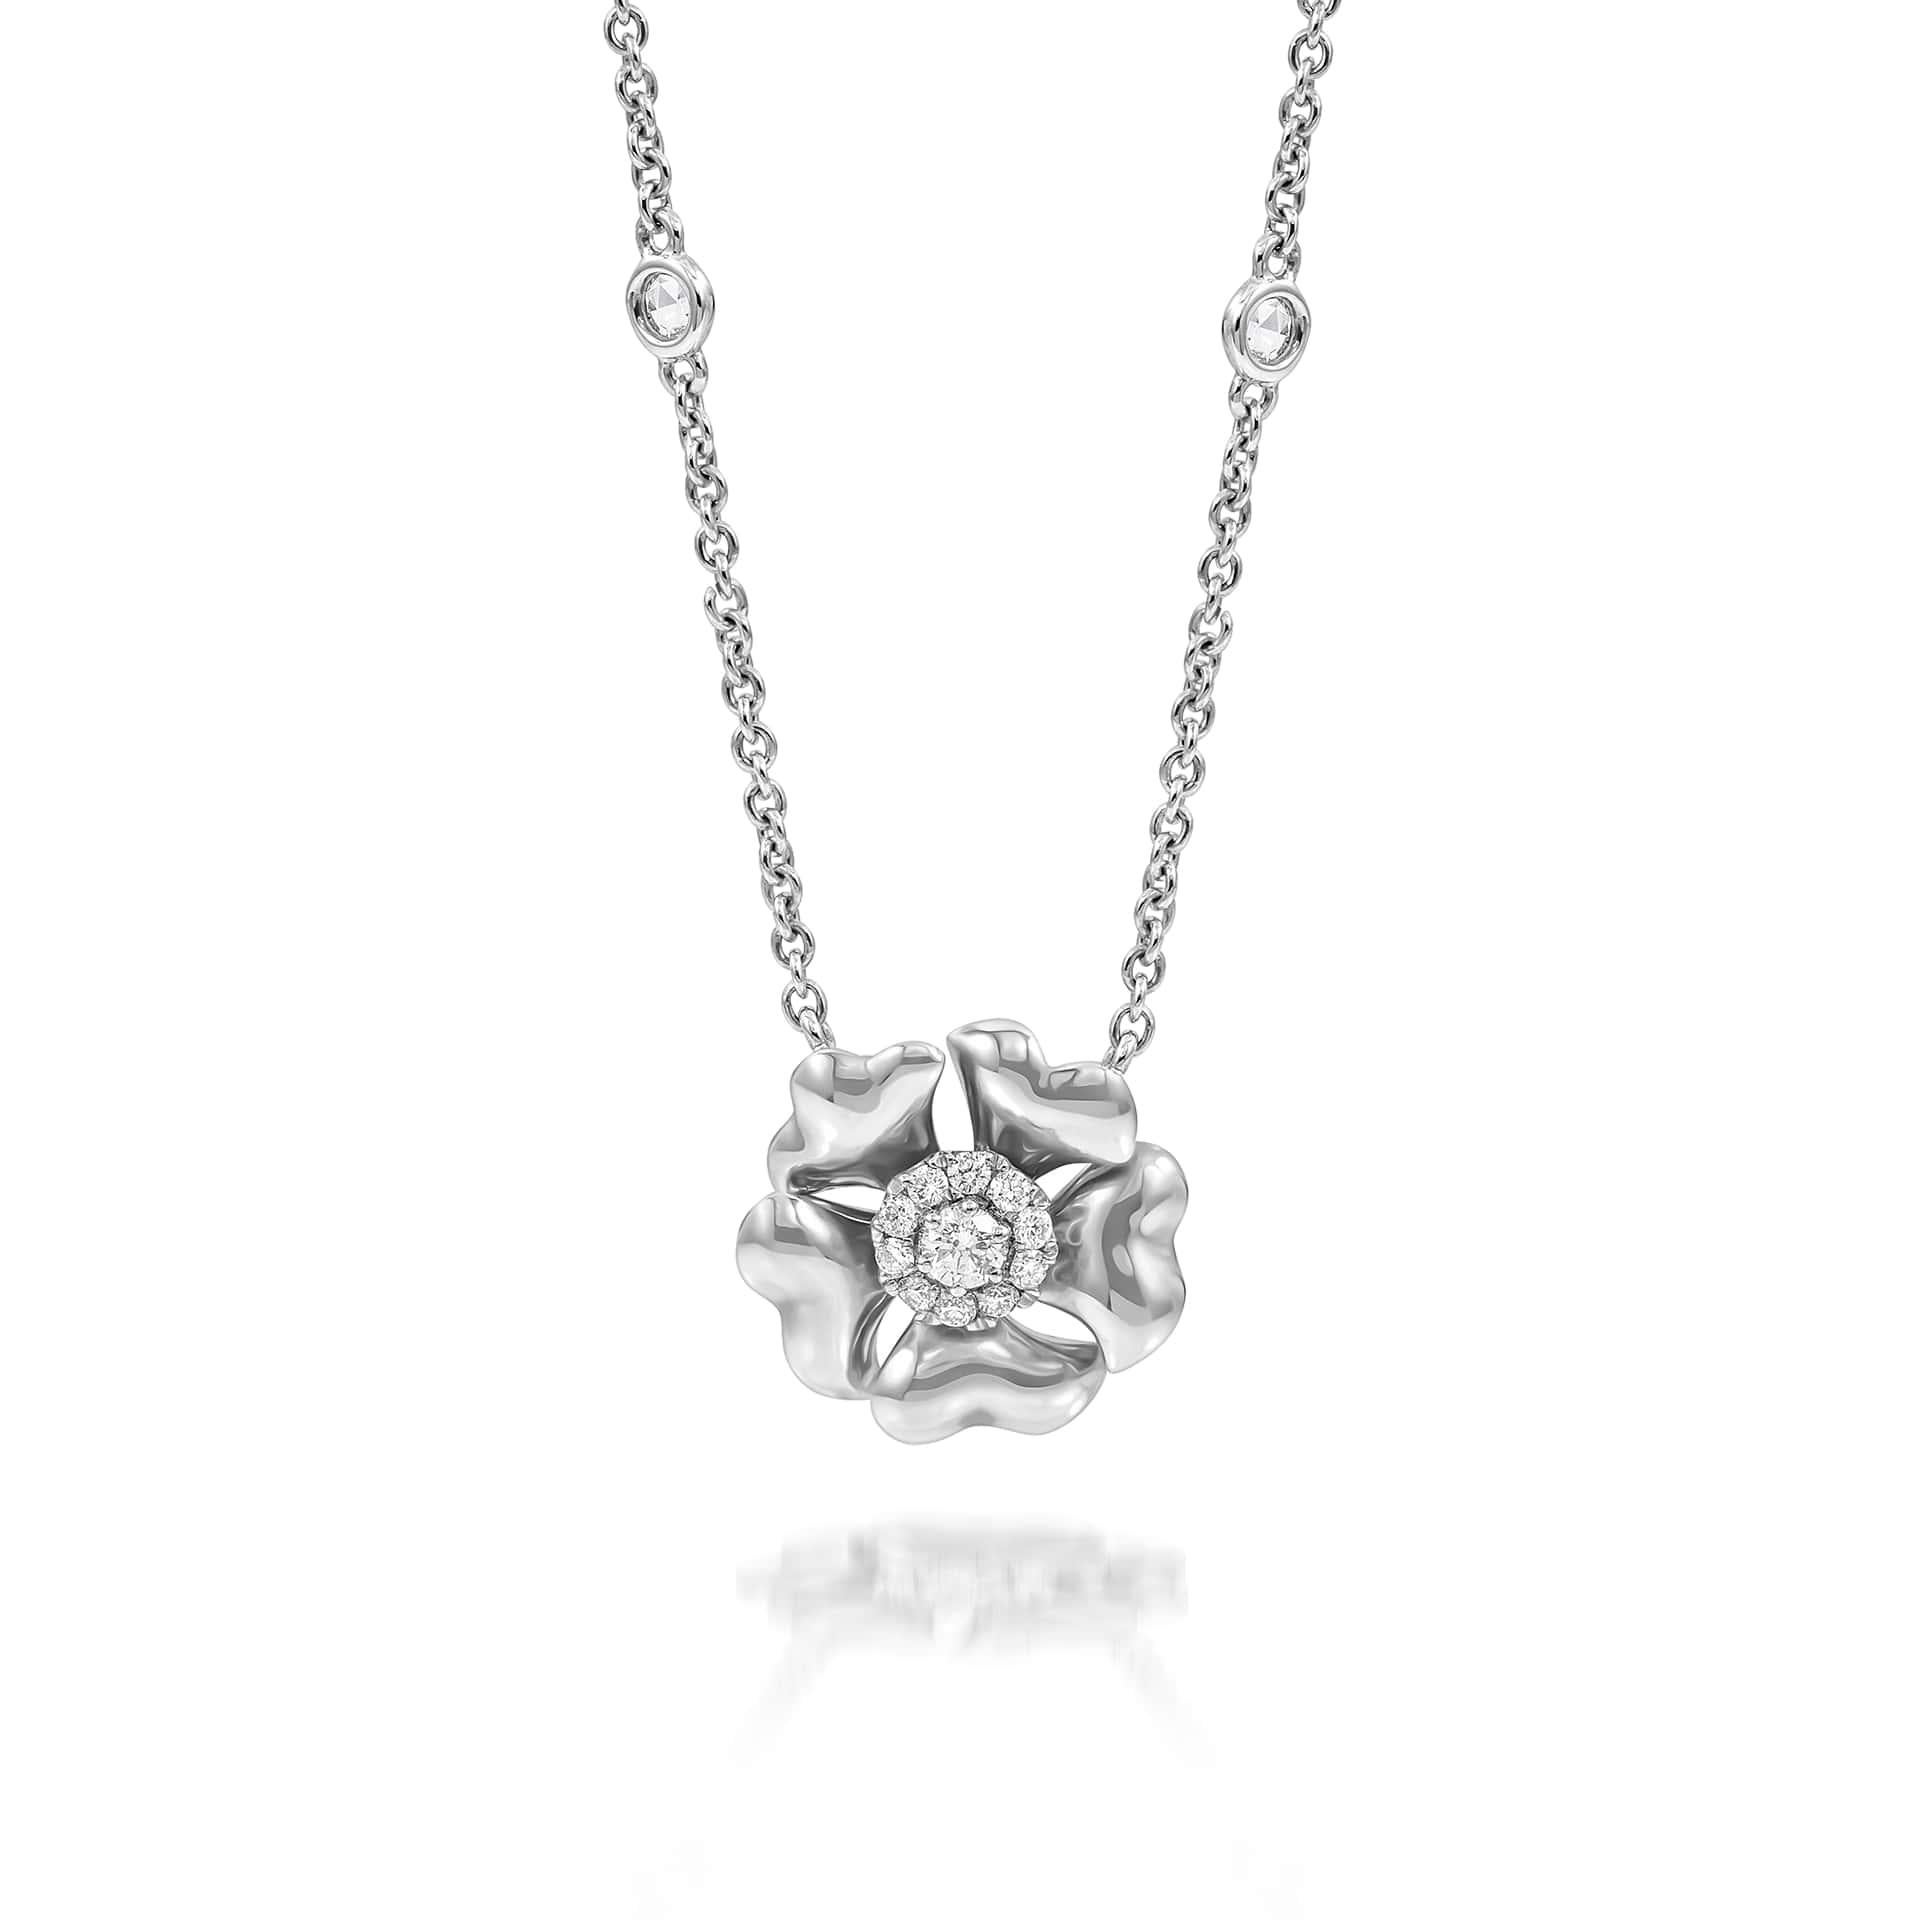 Bloom Gold and Diamond Flower Halo Necklace in 18K White Gold

Inspired by the exquisite petals of the alpine cinquefoil flower, the Bloom collection combines the richness of diamonds and precious metals with the light versatility of this delicate,